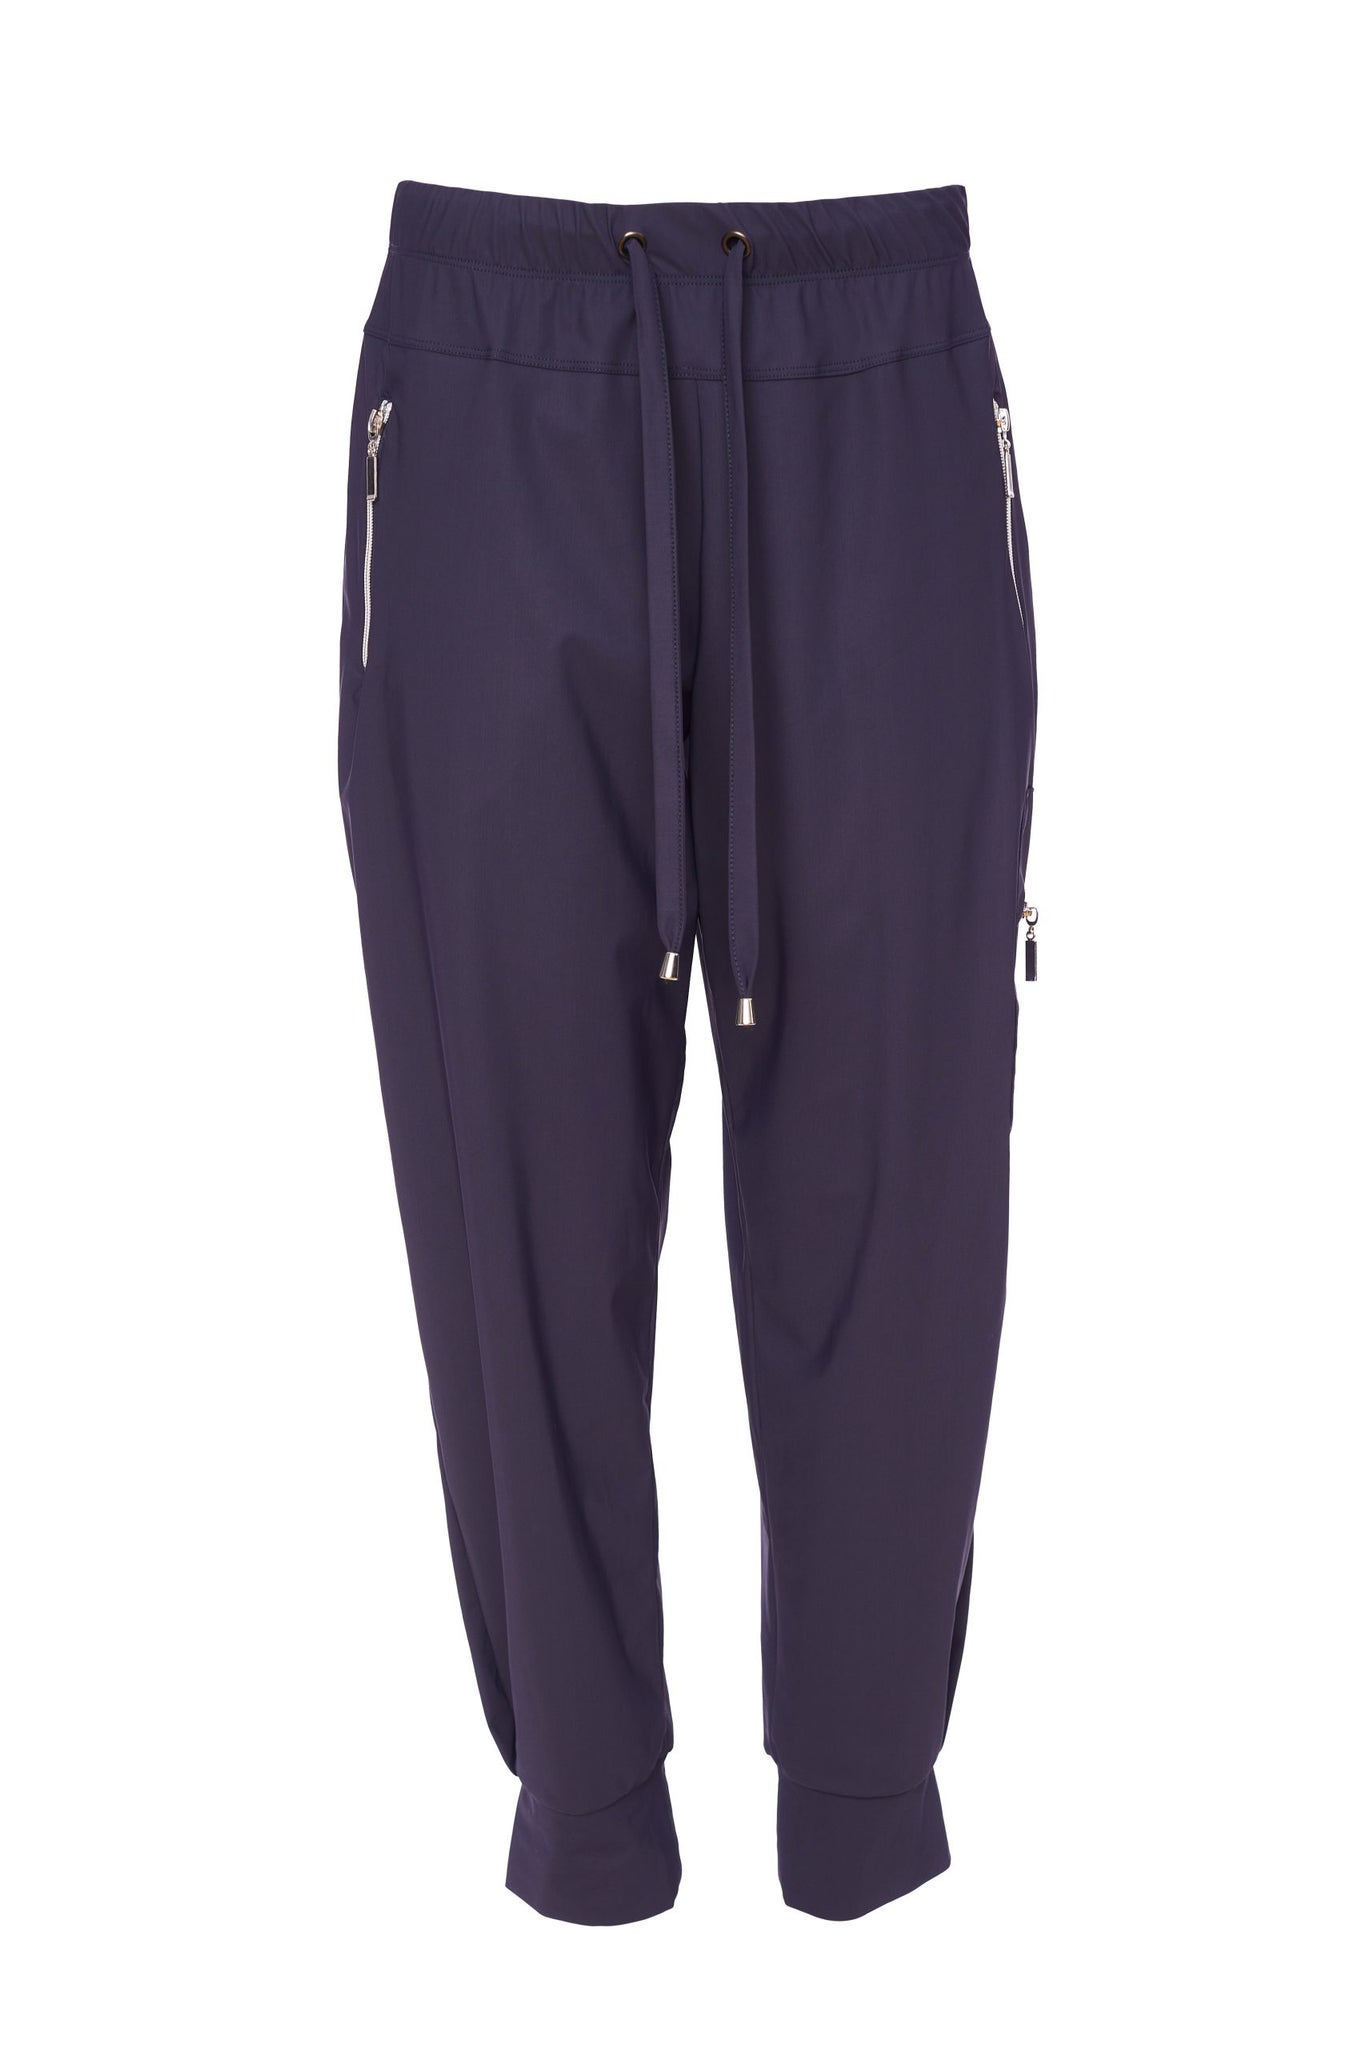 NAYA cuff travel fabric trousers with zip pockets in navy